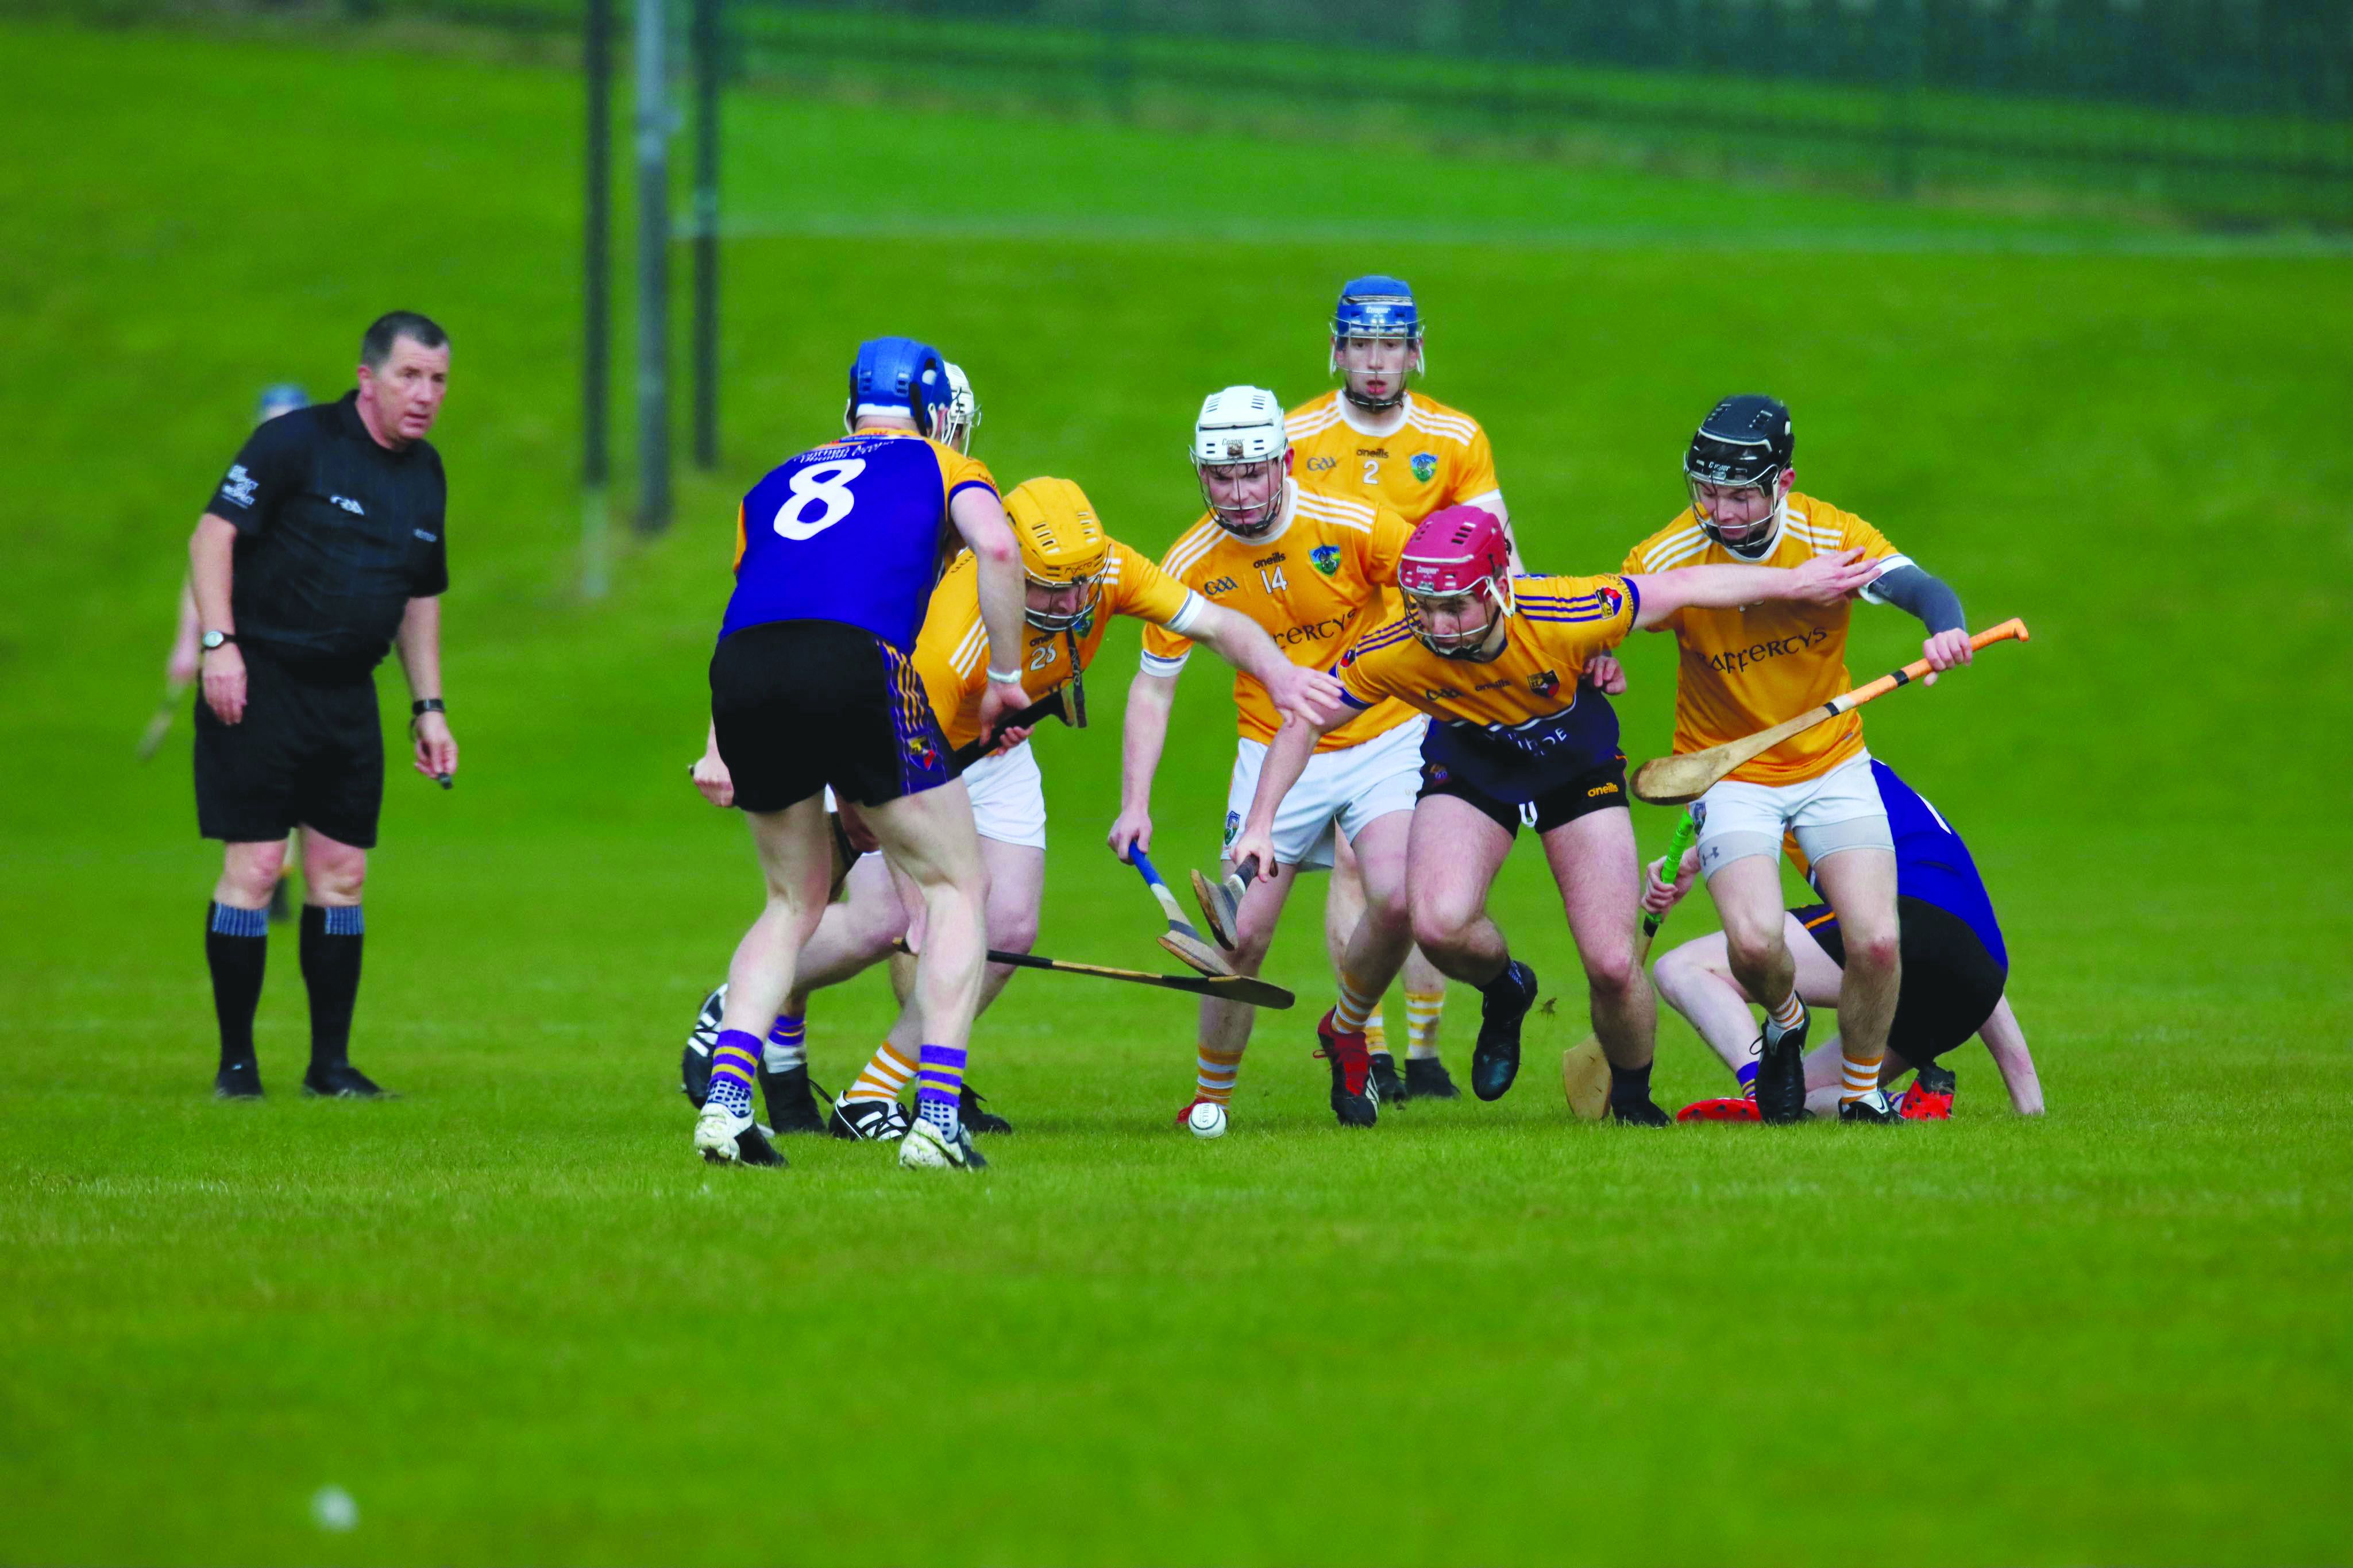 Carryduff\'s Donal Rooney battles for possession against Tony Duffy of Cuchulainns 